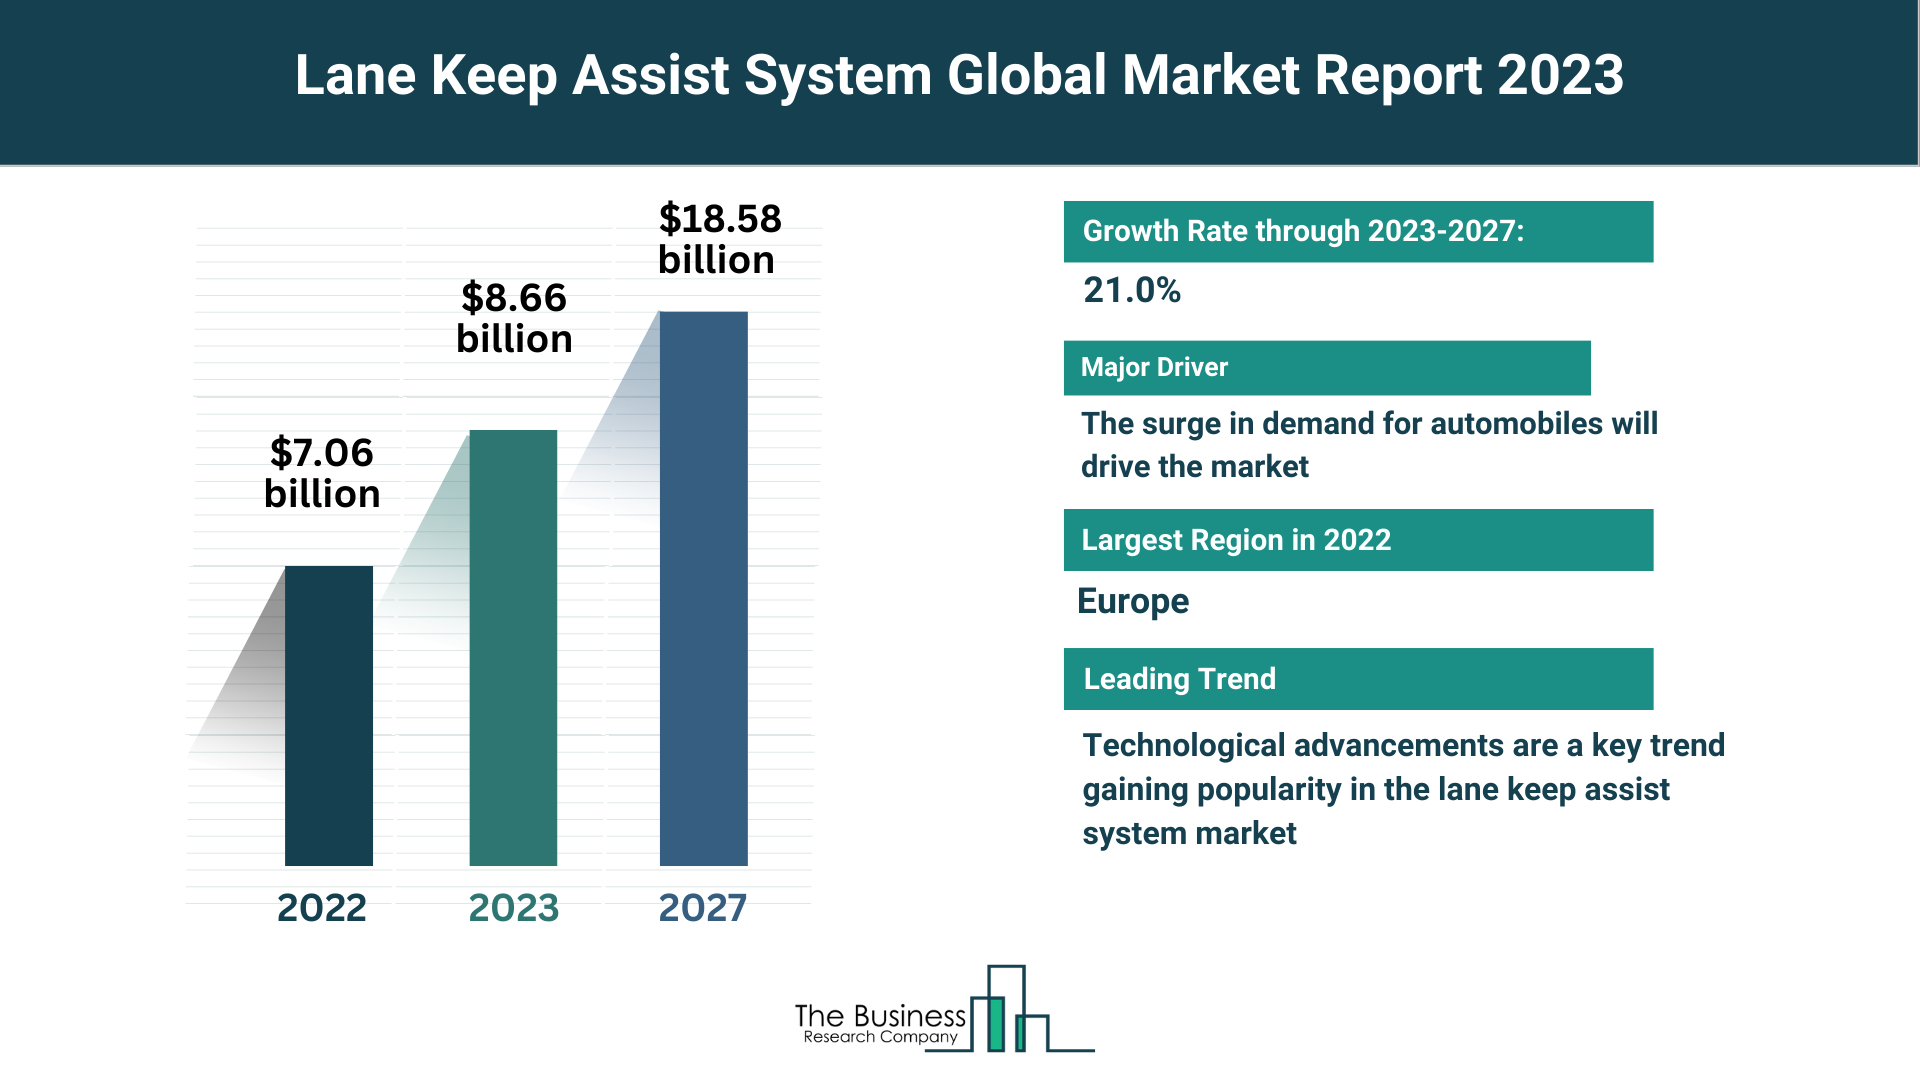 Global Lane Keep Assist System Market Overview 2023: Size, Drivers, And Trends